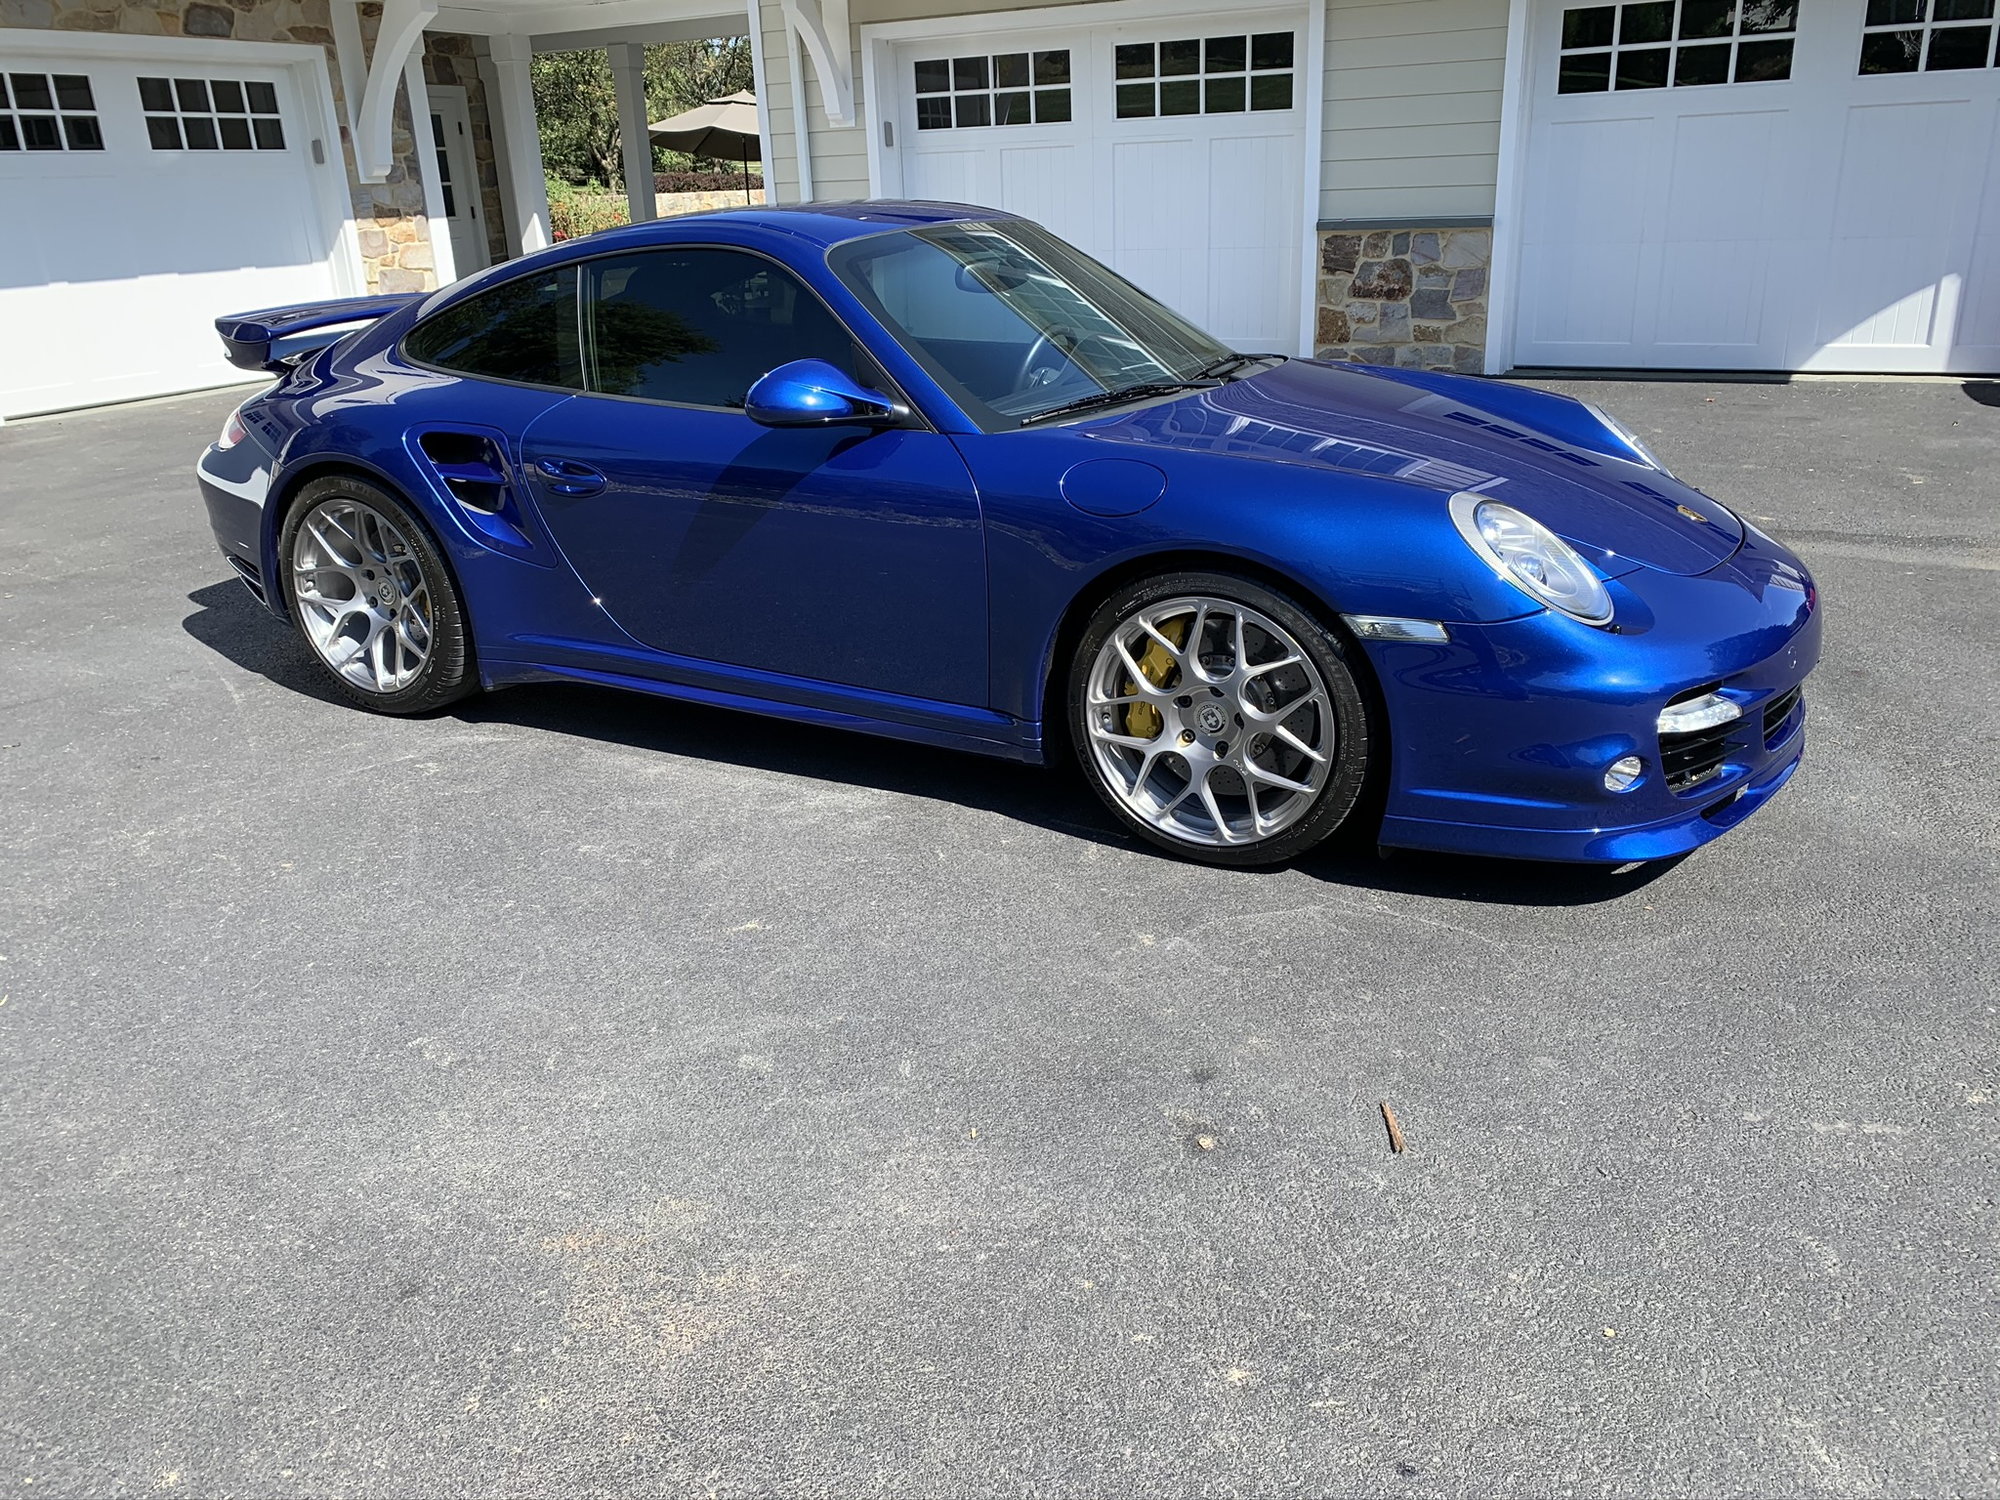 2012 Porsche 911 -  - Used - VIN WP0AD2A96CS766681 - 6 cyl - AWD - Automatic - Coupe - Blue - Malvern, PA 19355, United States